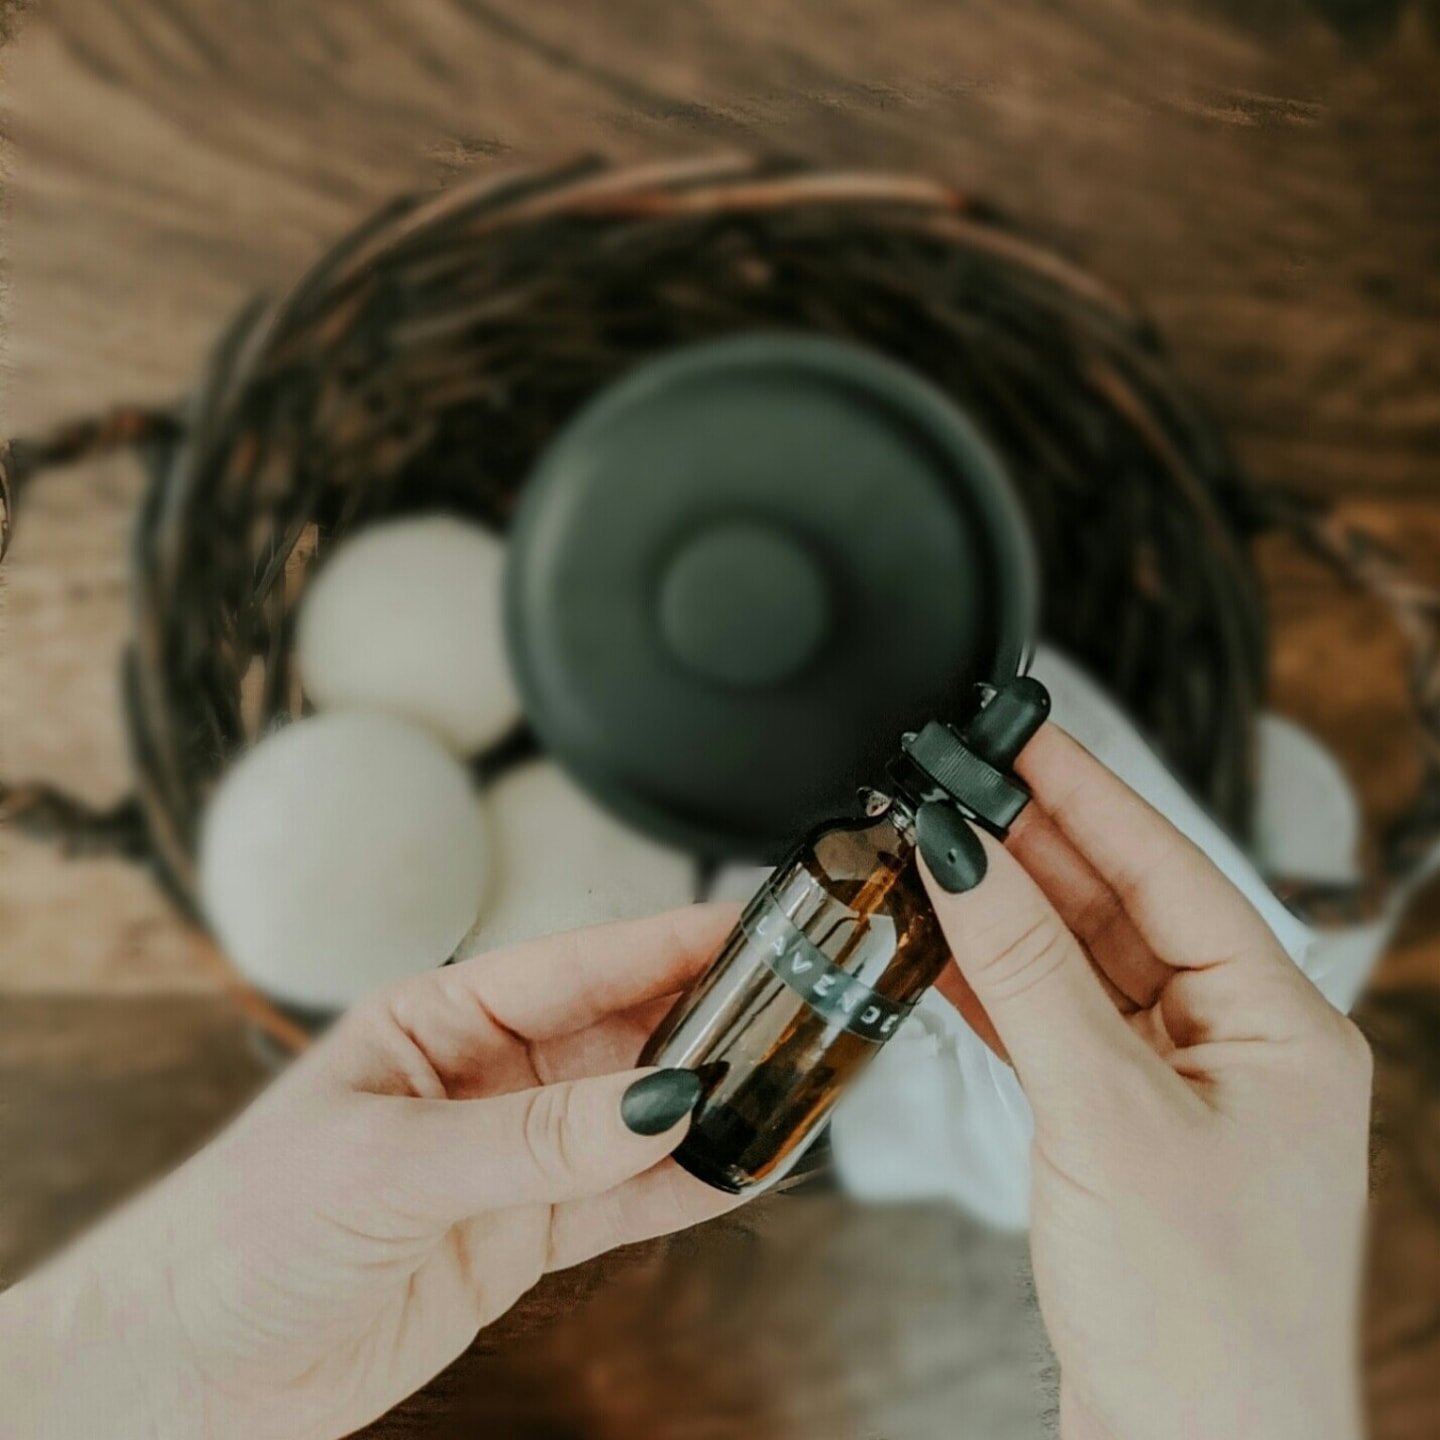 i love adding a few drops of lavender to my wool dryer balls when doing laundry 💜

what's your favorite essential oil to use??